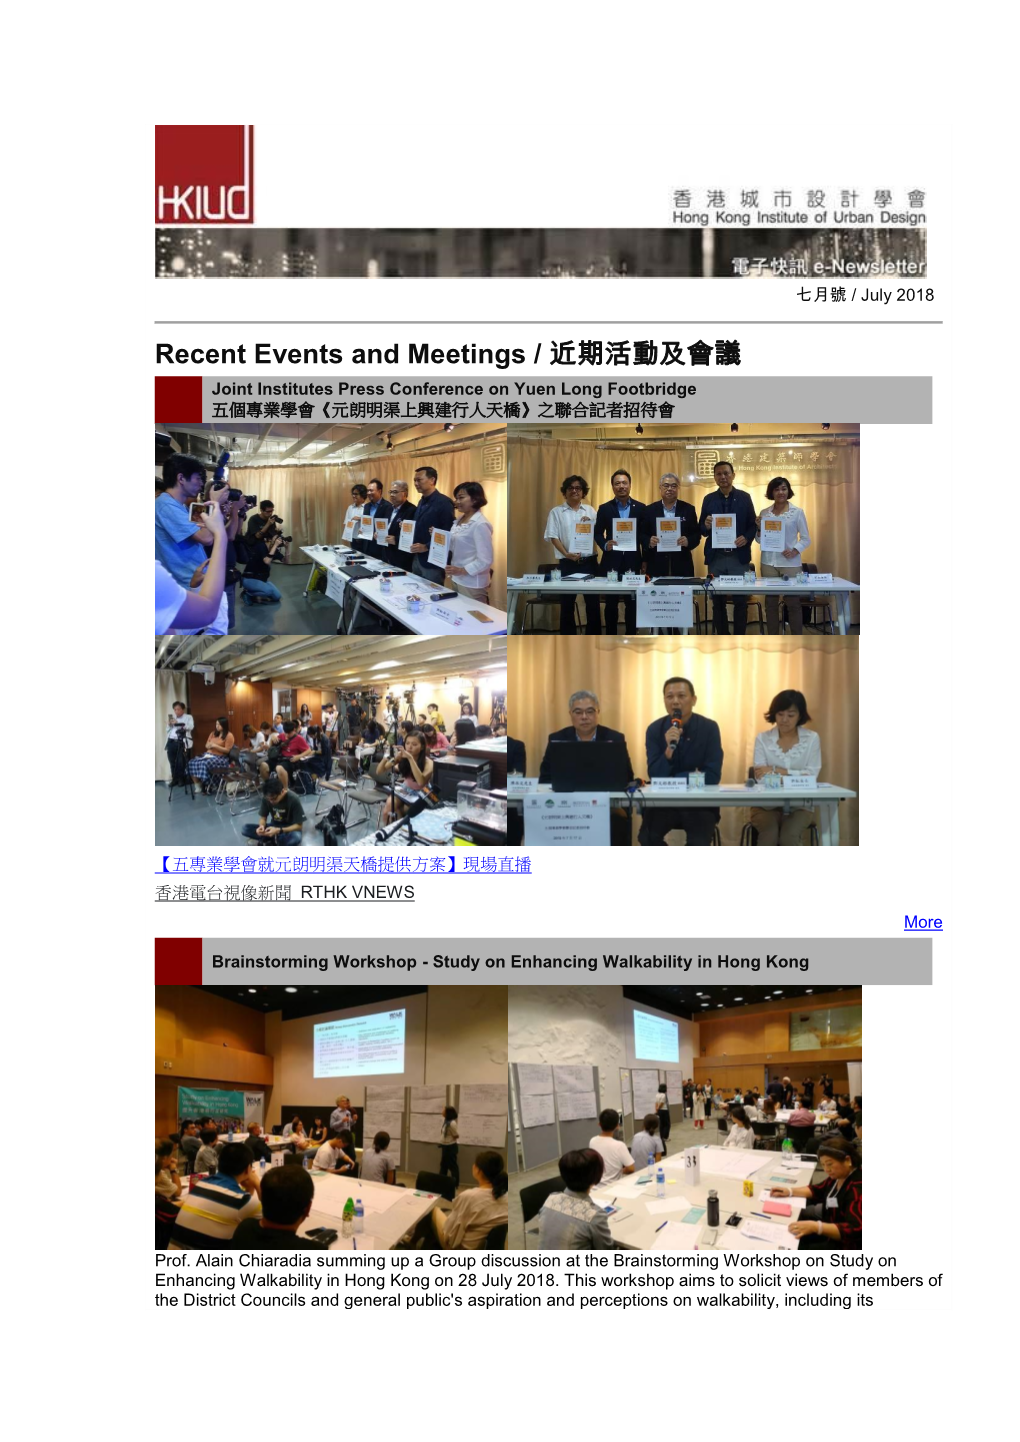 Recent Events and Meetings / 近期活動及會議 Joint Institutes Press Conference on Yuen Long Footbridge